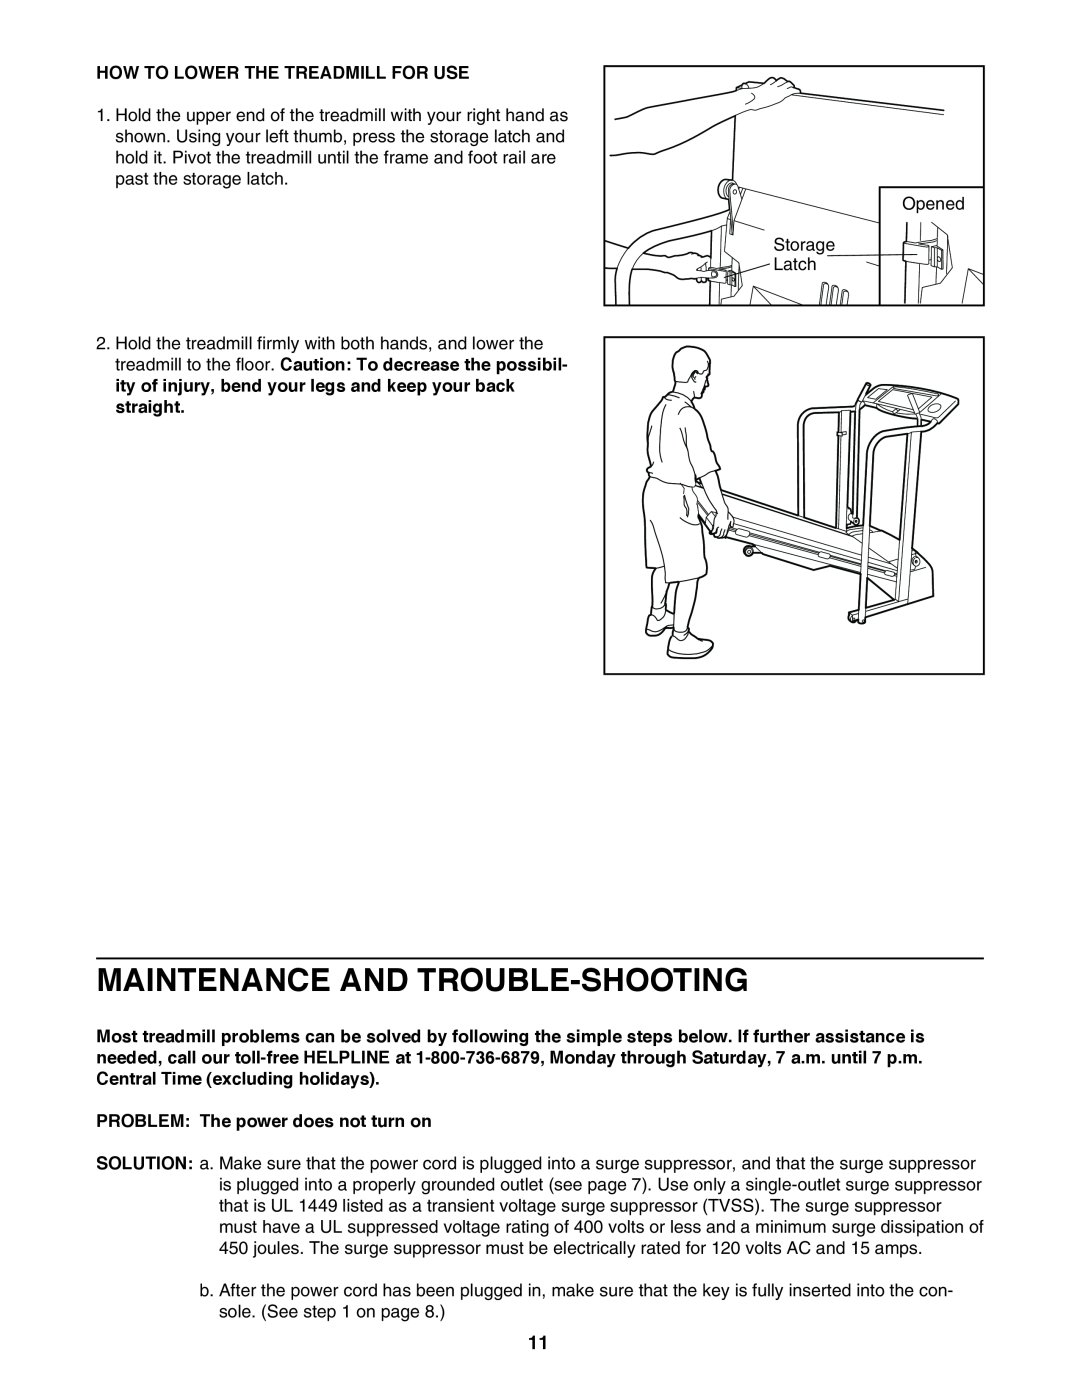 ProForm 831.297390 user manual Maintenance And Trouble-Shooting, How To Lower The Treadmill For Use 